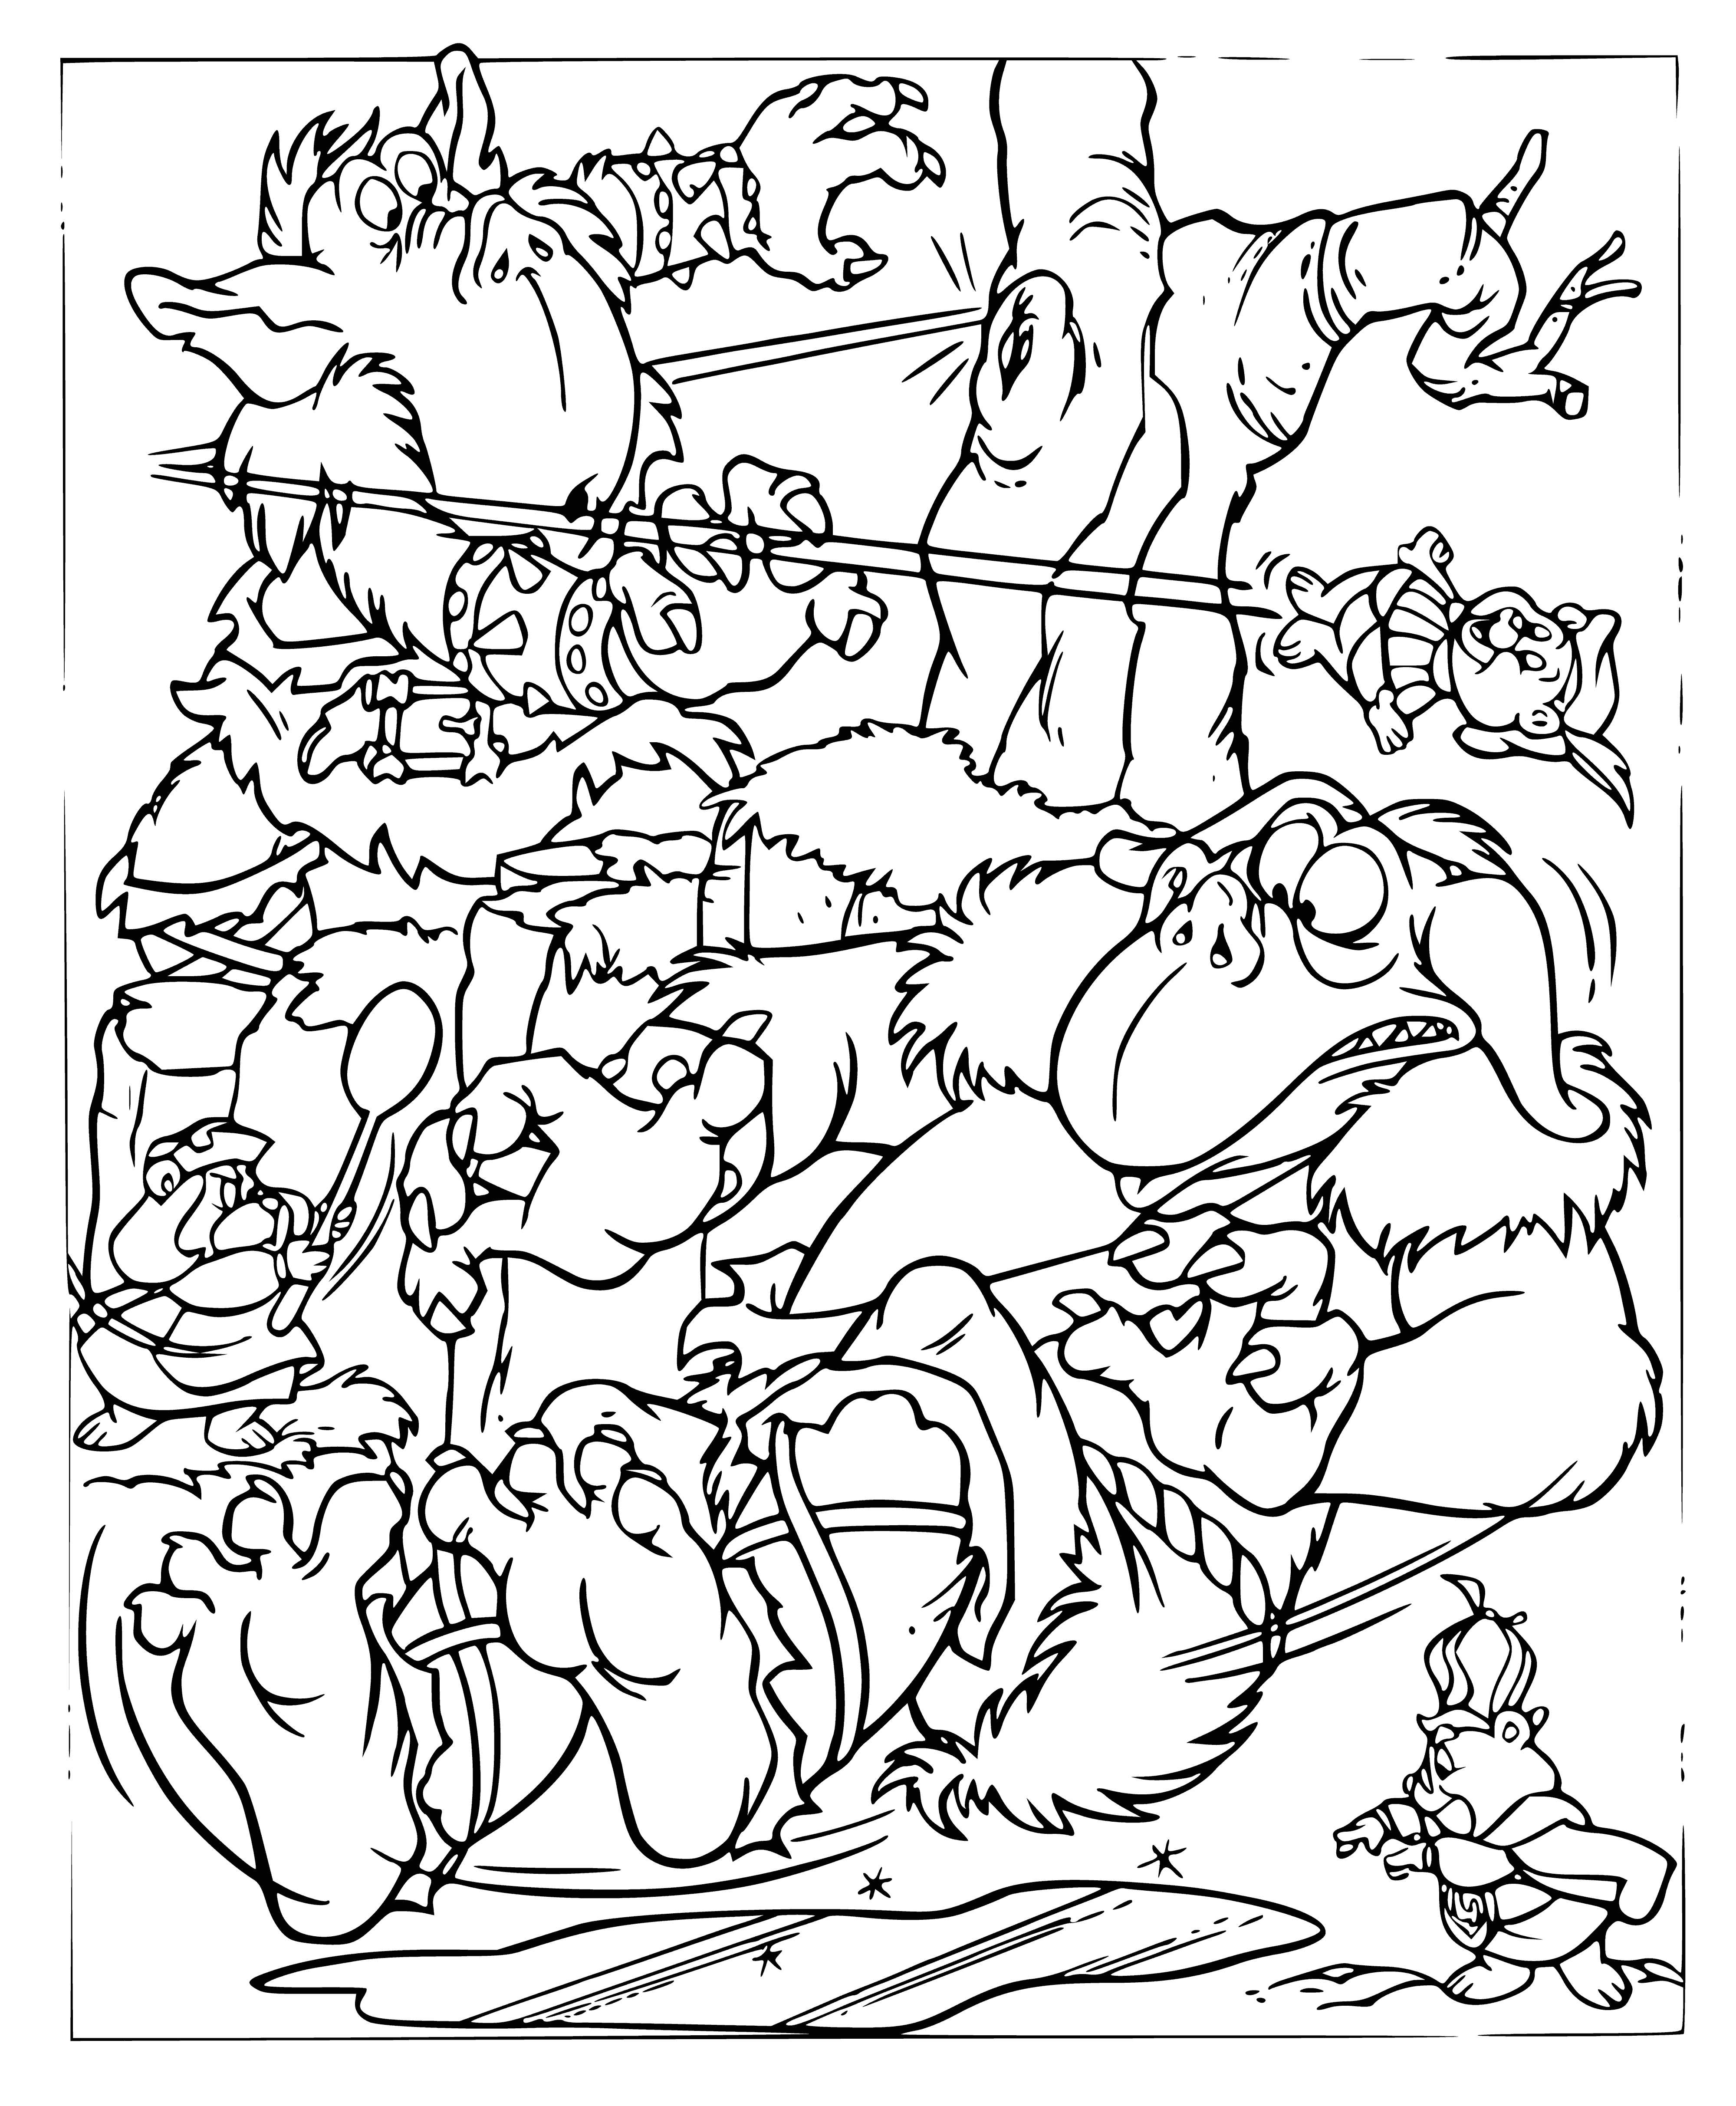 coloring page: Gummi Bears are mythical creatures that are blue, green or purple, with pointy ears and noses and can be seen wearing armor and carrying swords.